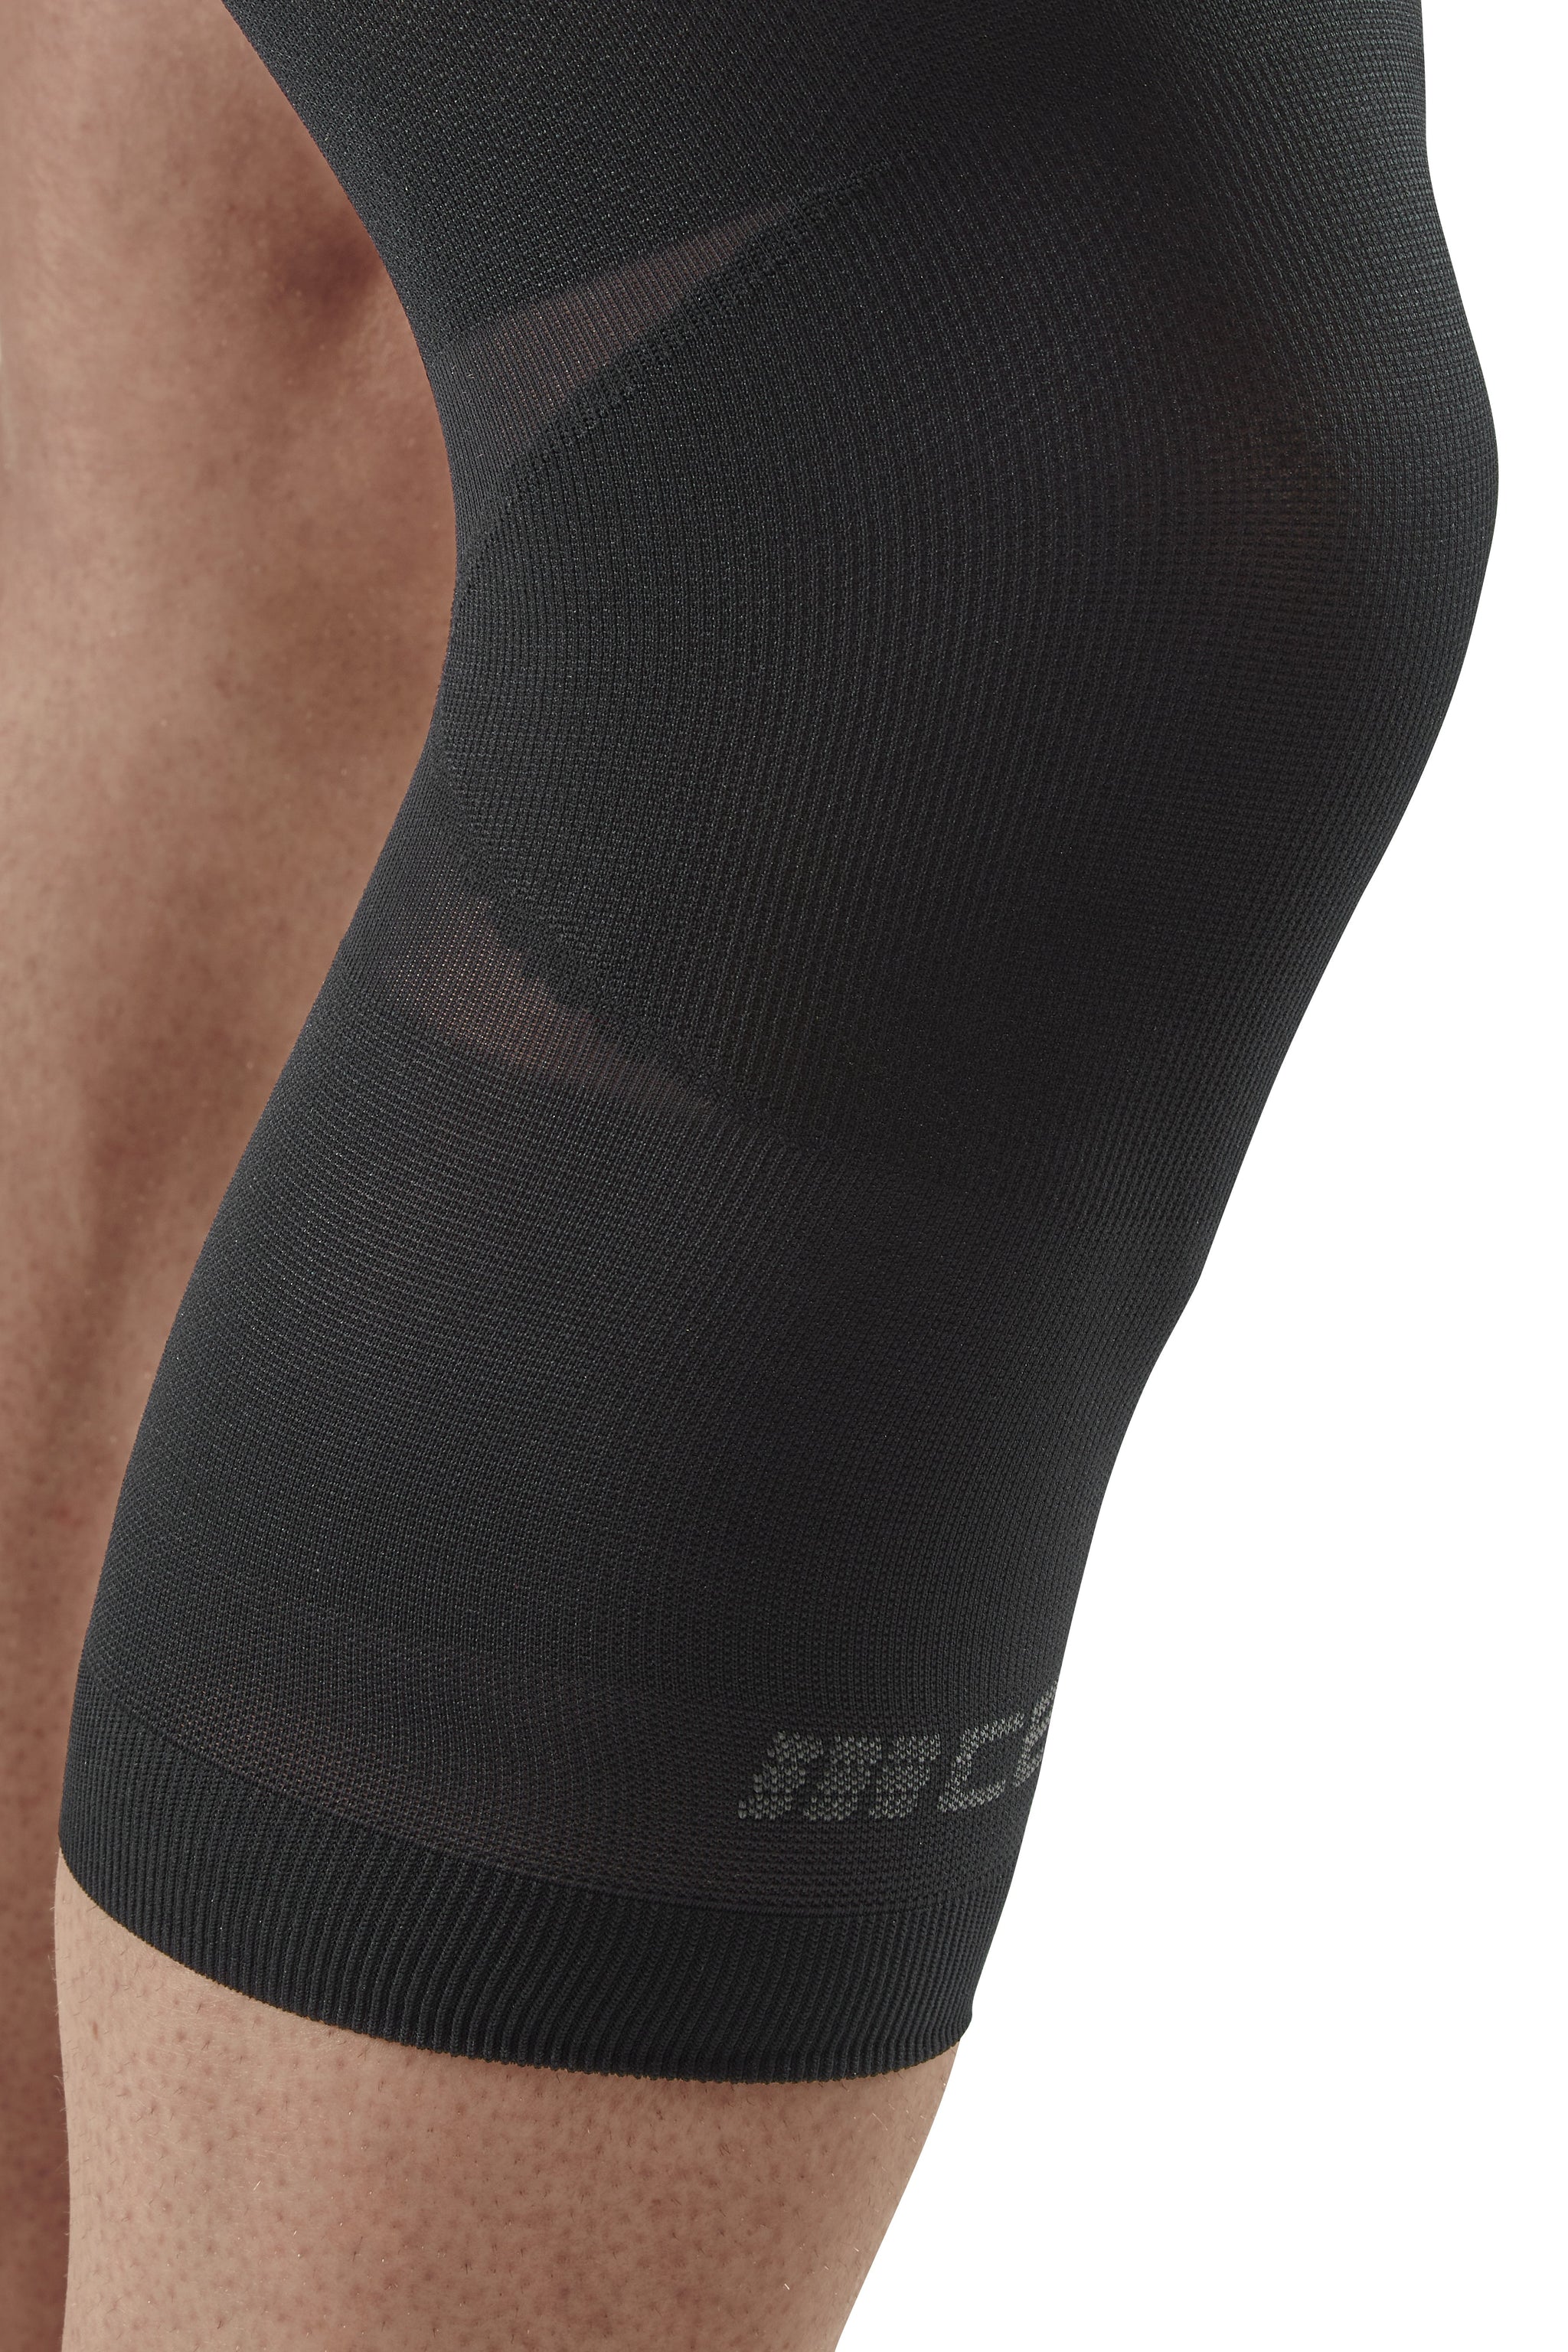 Circa Knee Sleeve Medium Compression Knee Sleeves for Men and Women 2 Packs